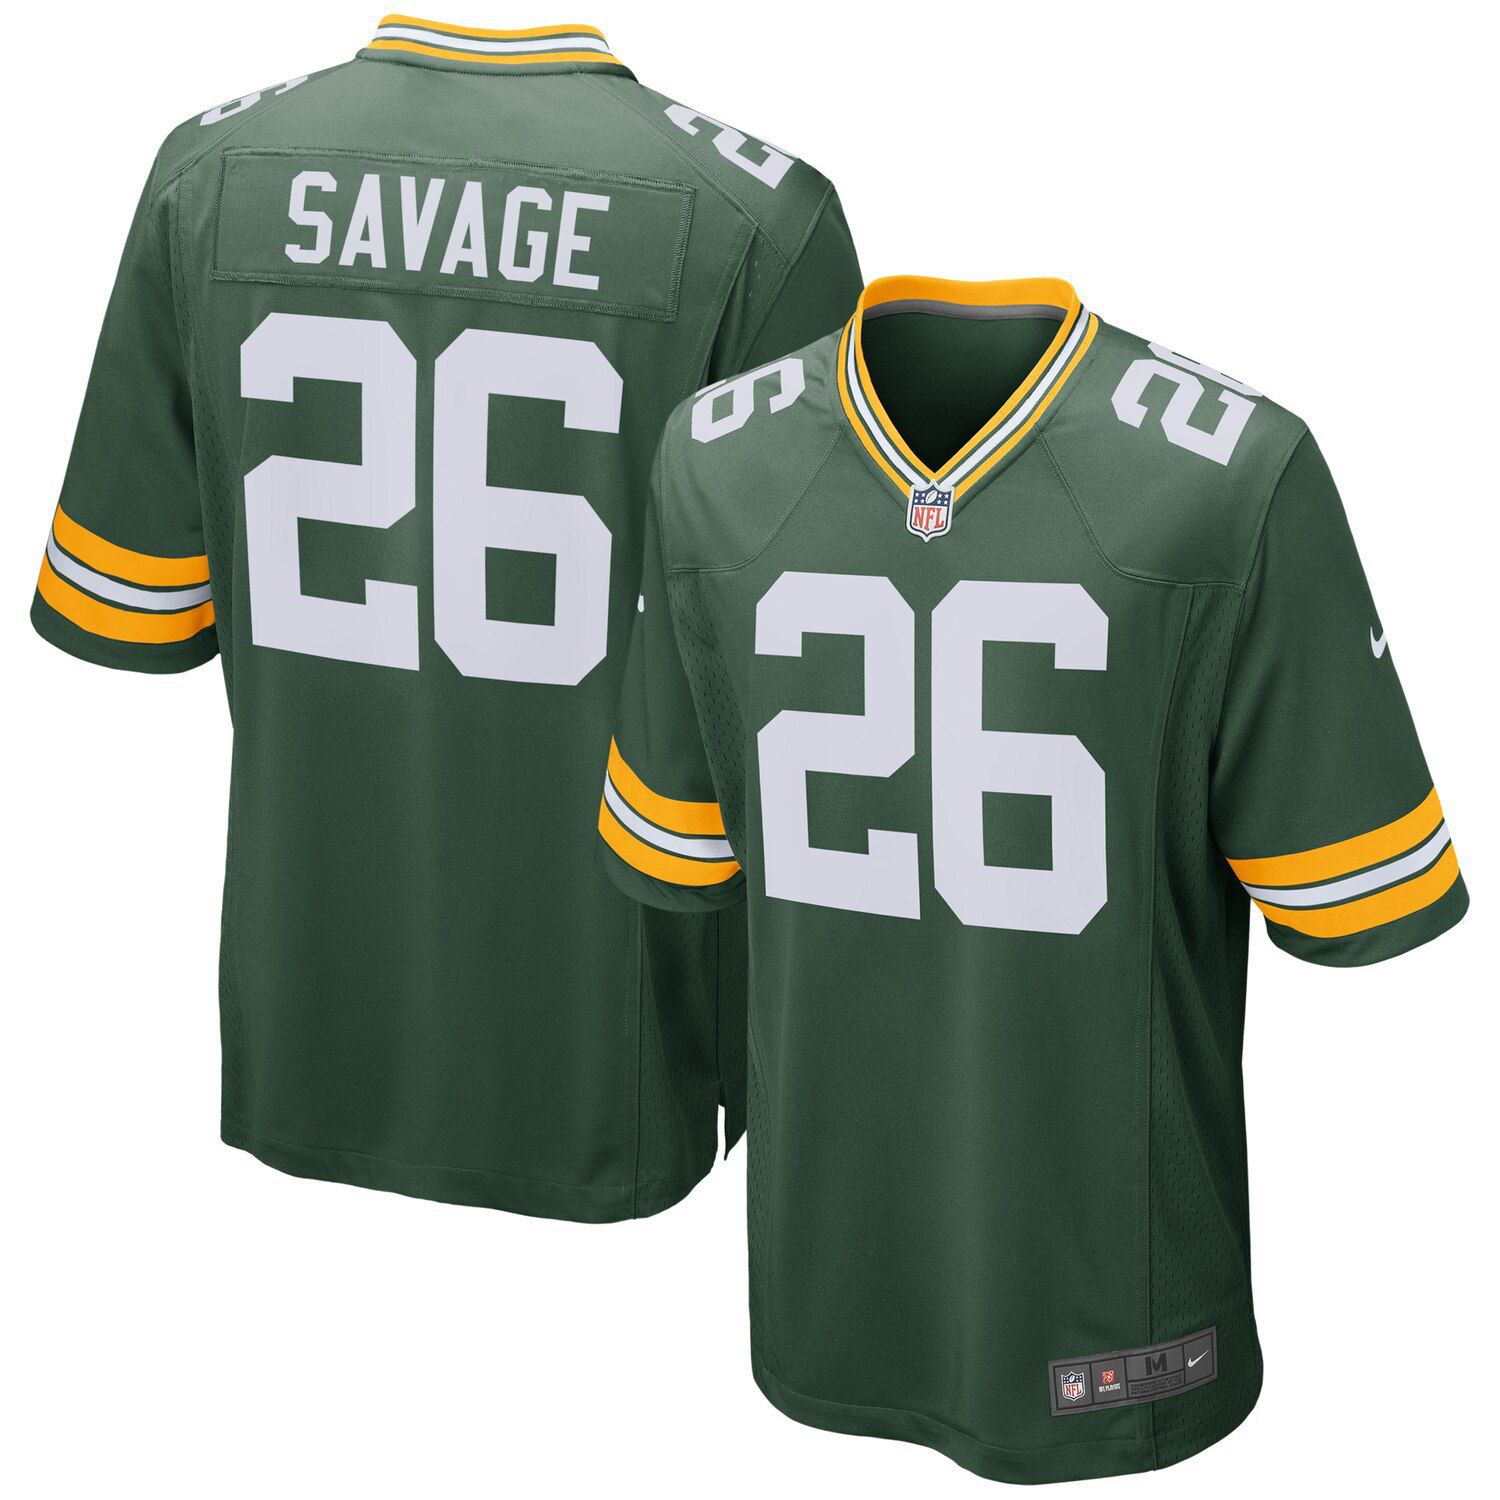 green bay packers jersey kohl's